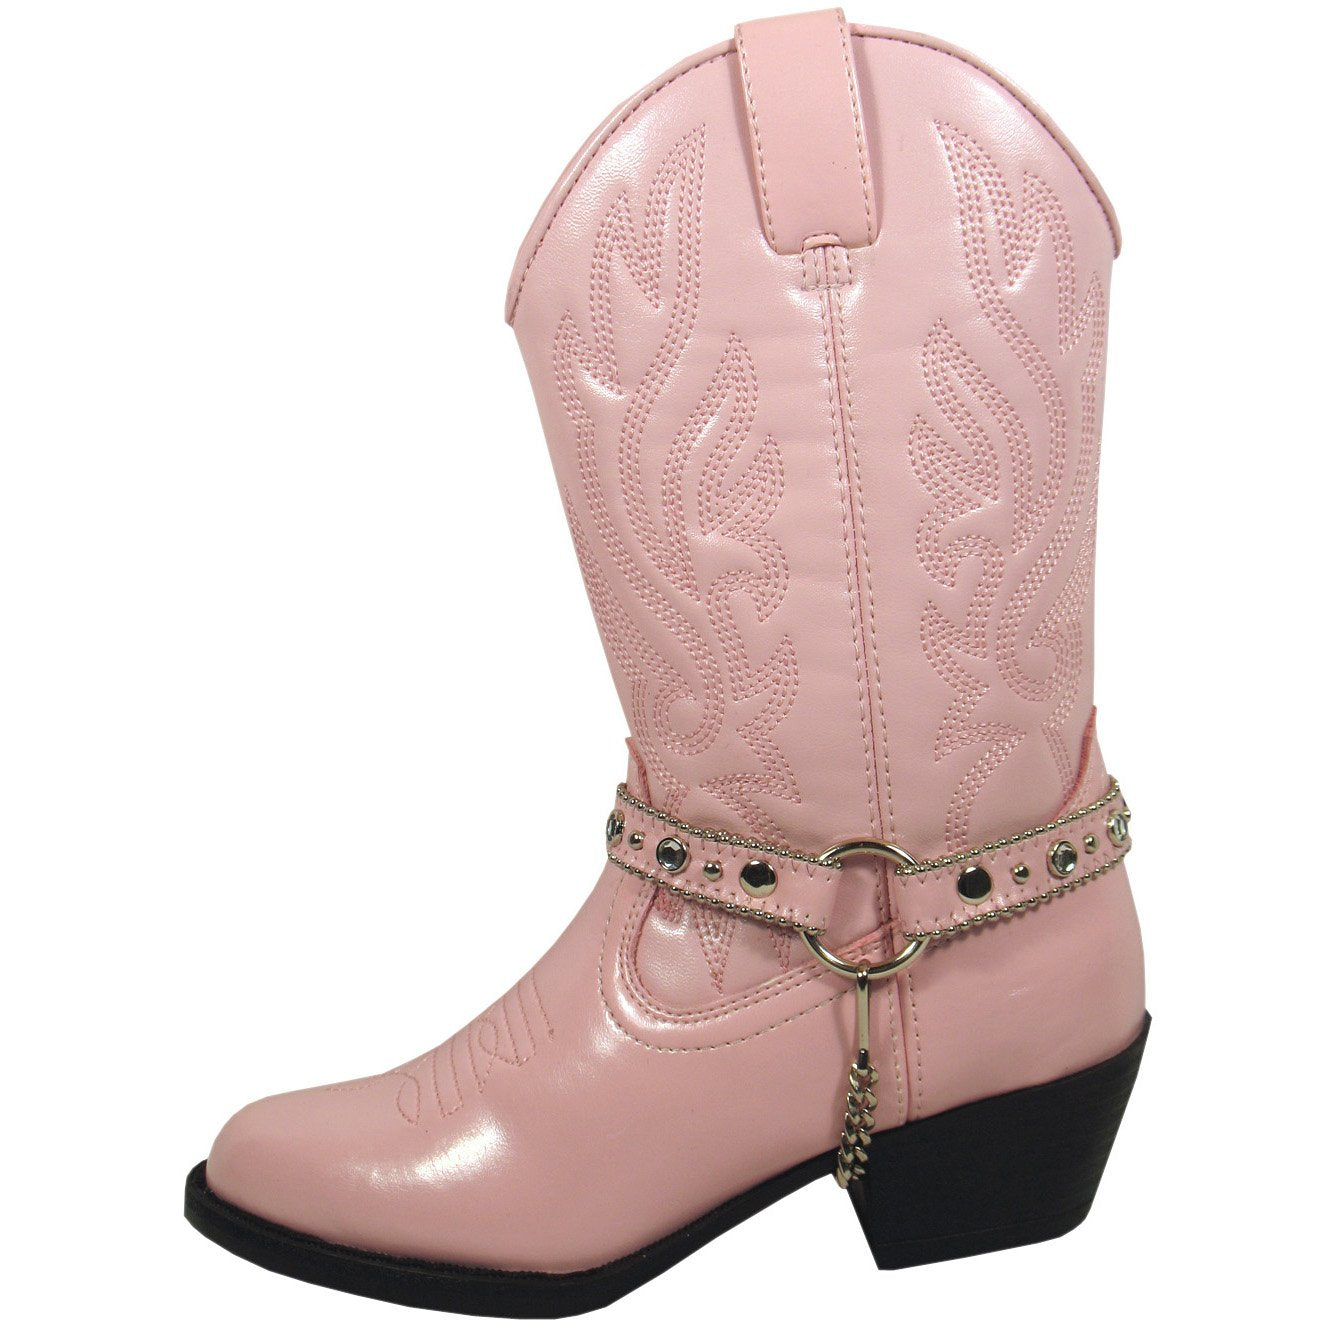 Smoky Mountain Girl's Children's Pink Western Boot